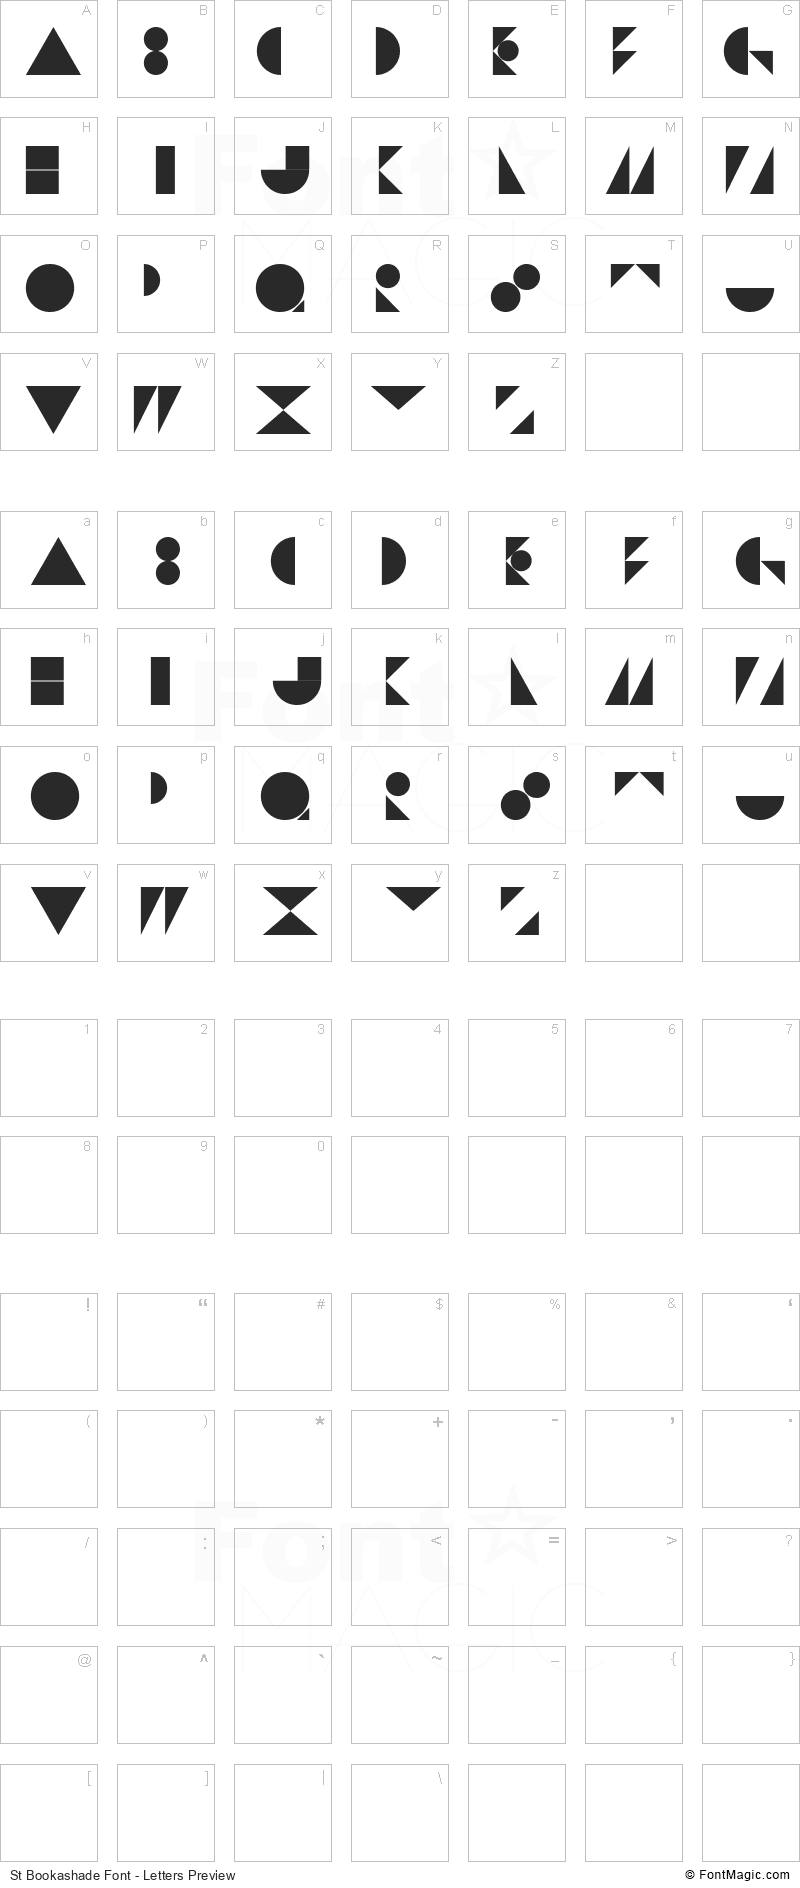 St Bookashade Font - All Latters Preview Chart